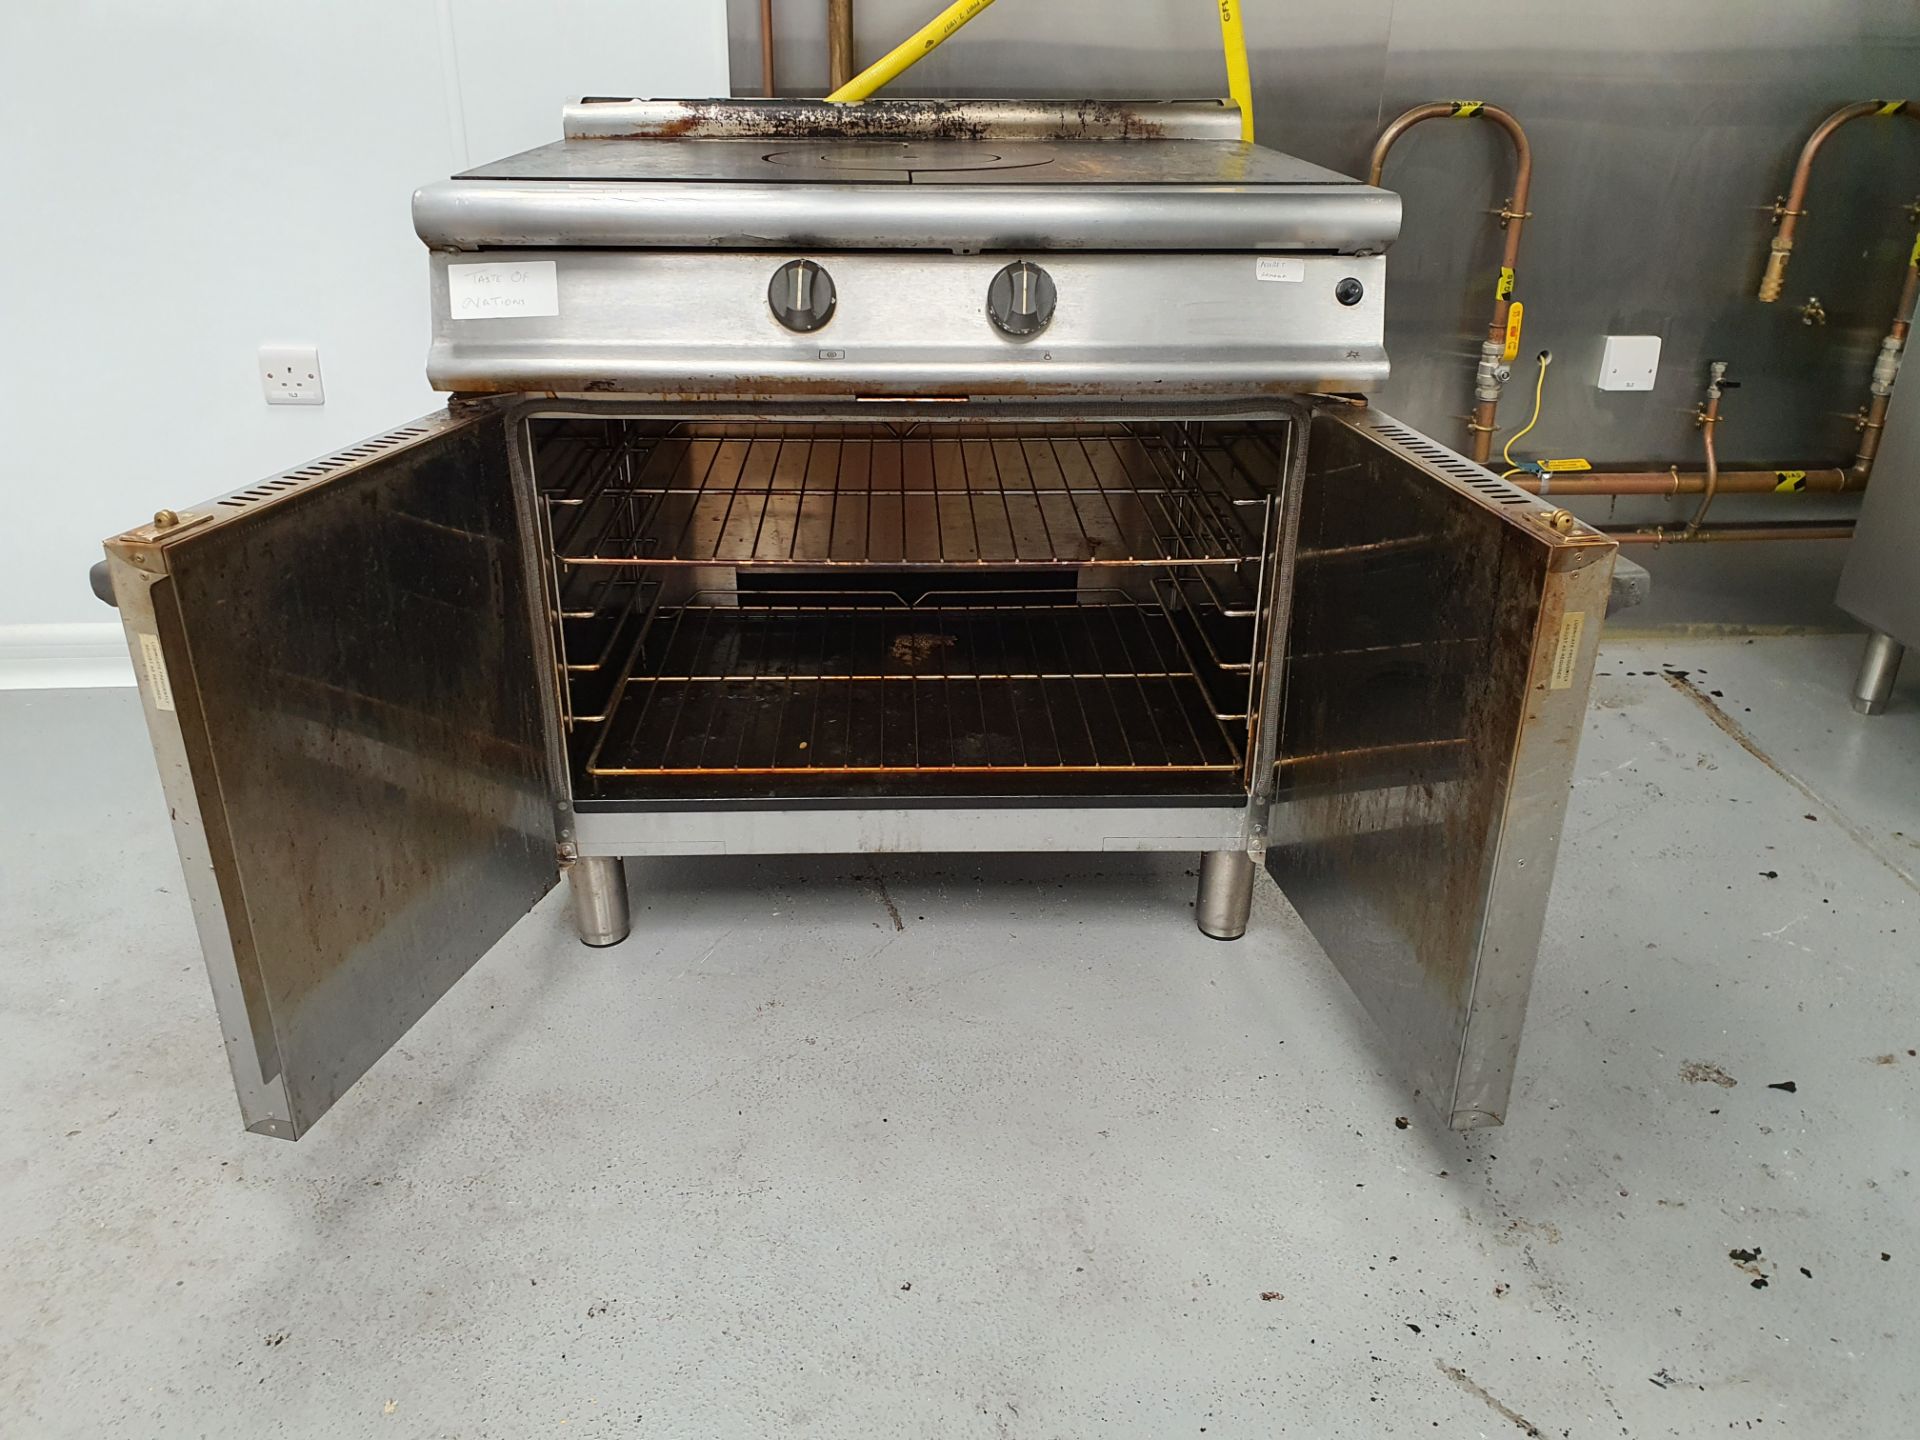 Dominator Plus Gas Range with Oven - Image 2 of 3